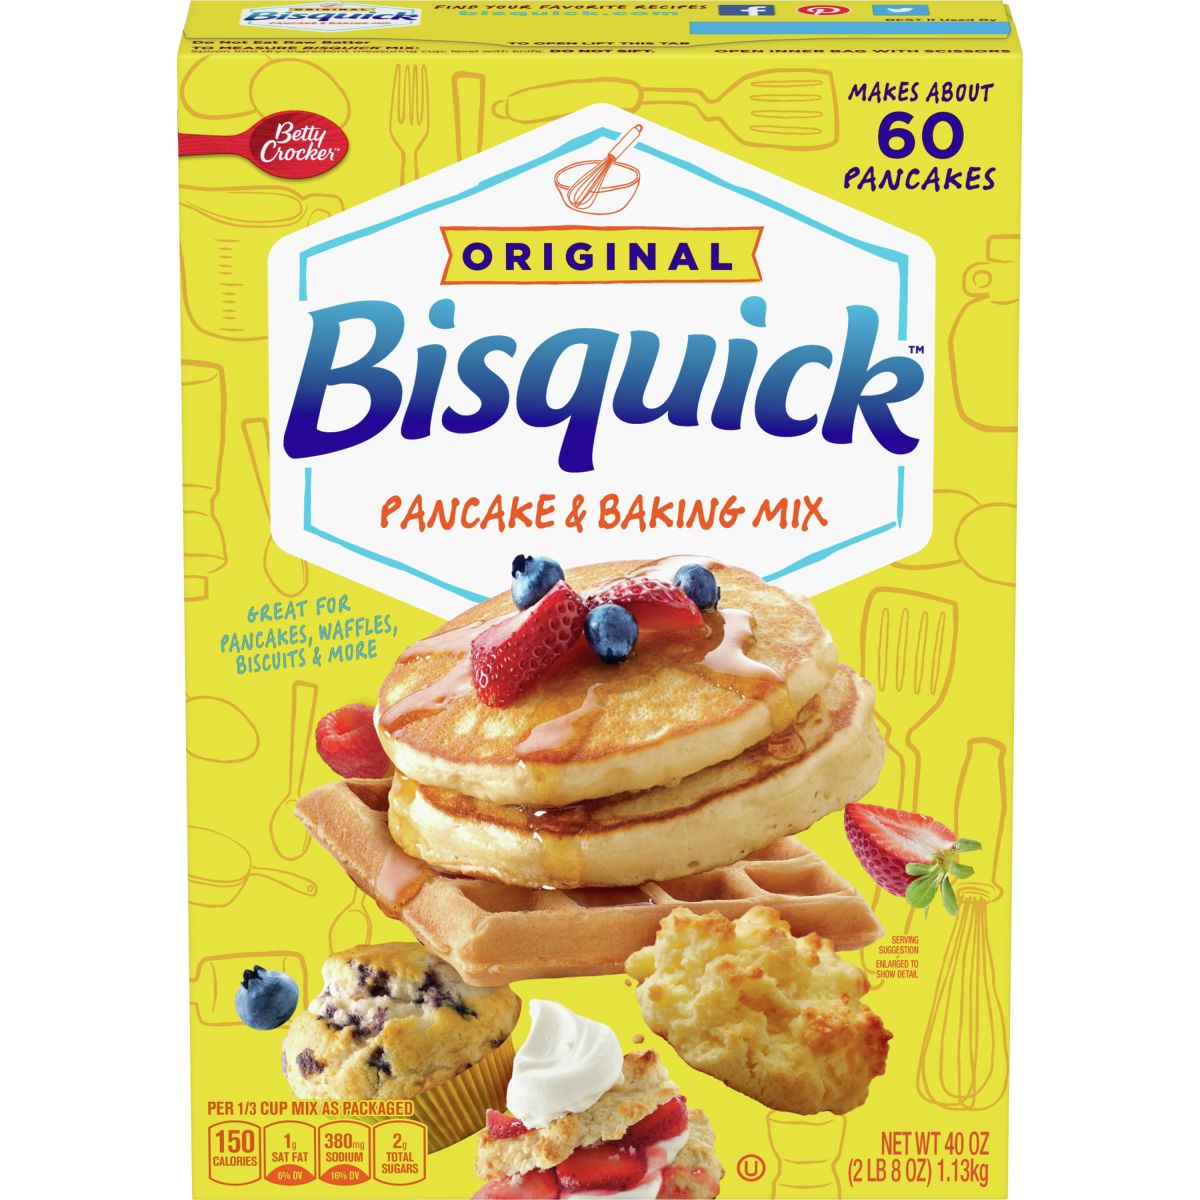 In 1977, a 40-ounce box of Bisquick cost 97 cents. Today, that same box of Bisquick costs $3.33 at Walmart, $3.49 at Target, and $3.95 at Dollar General.